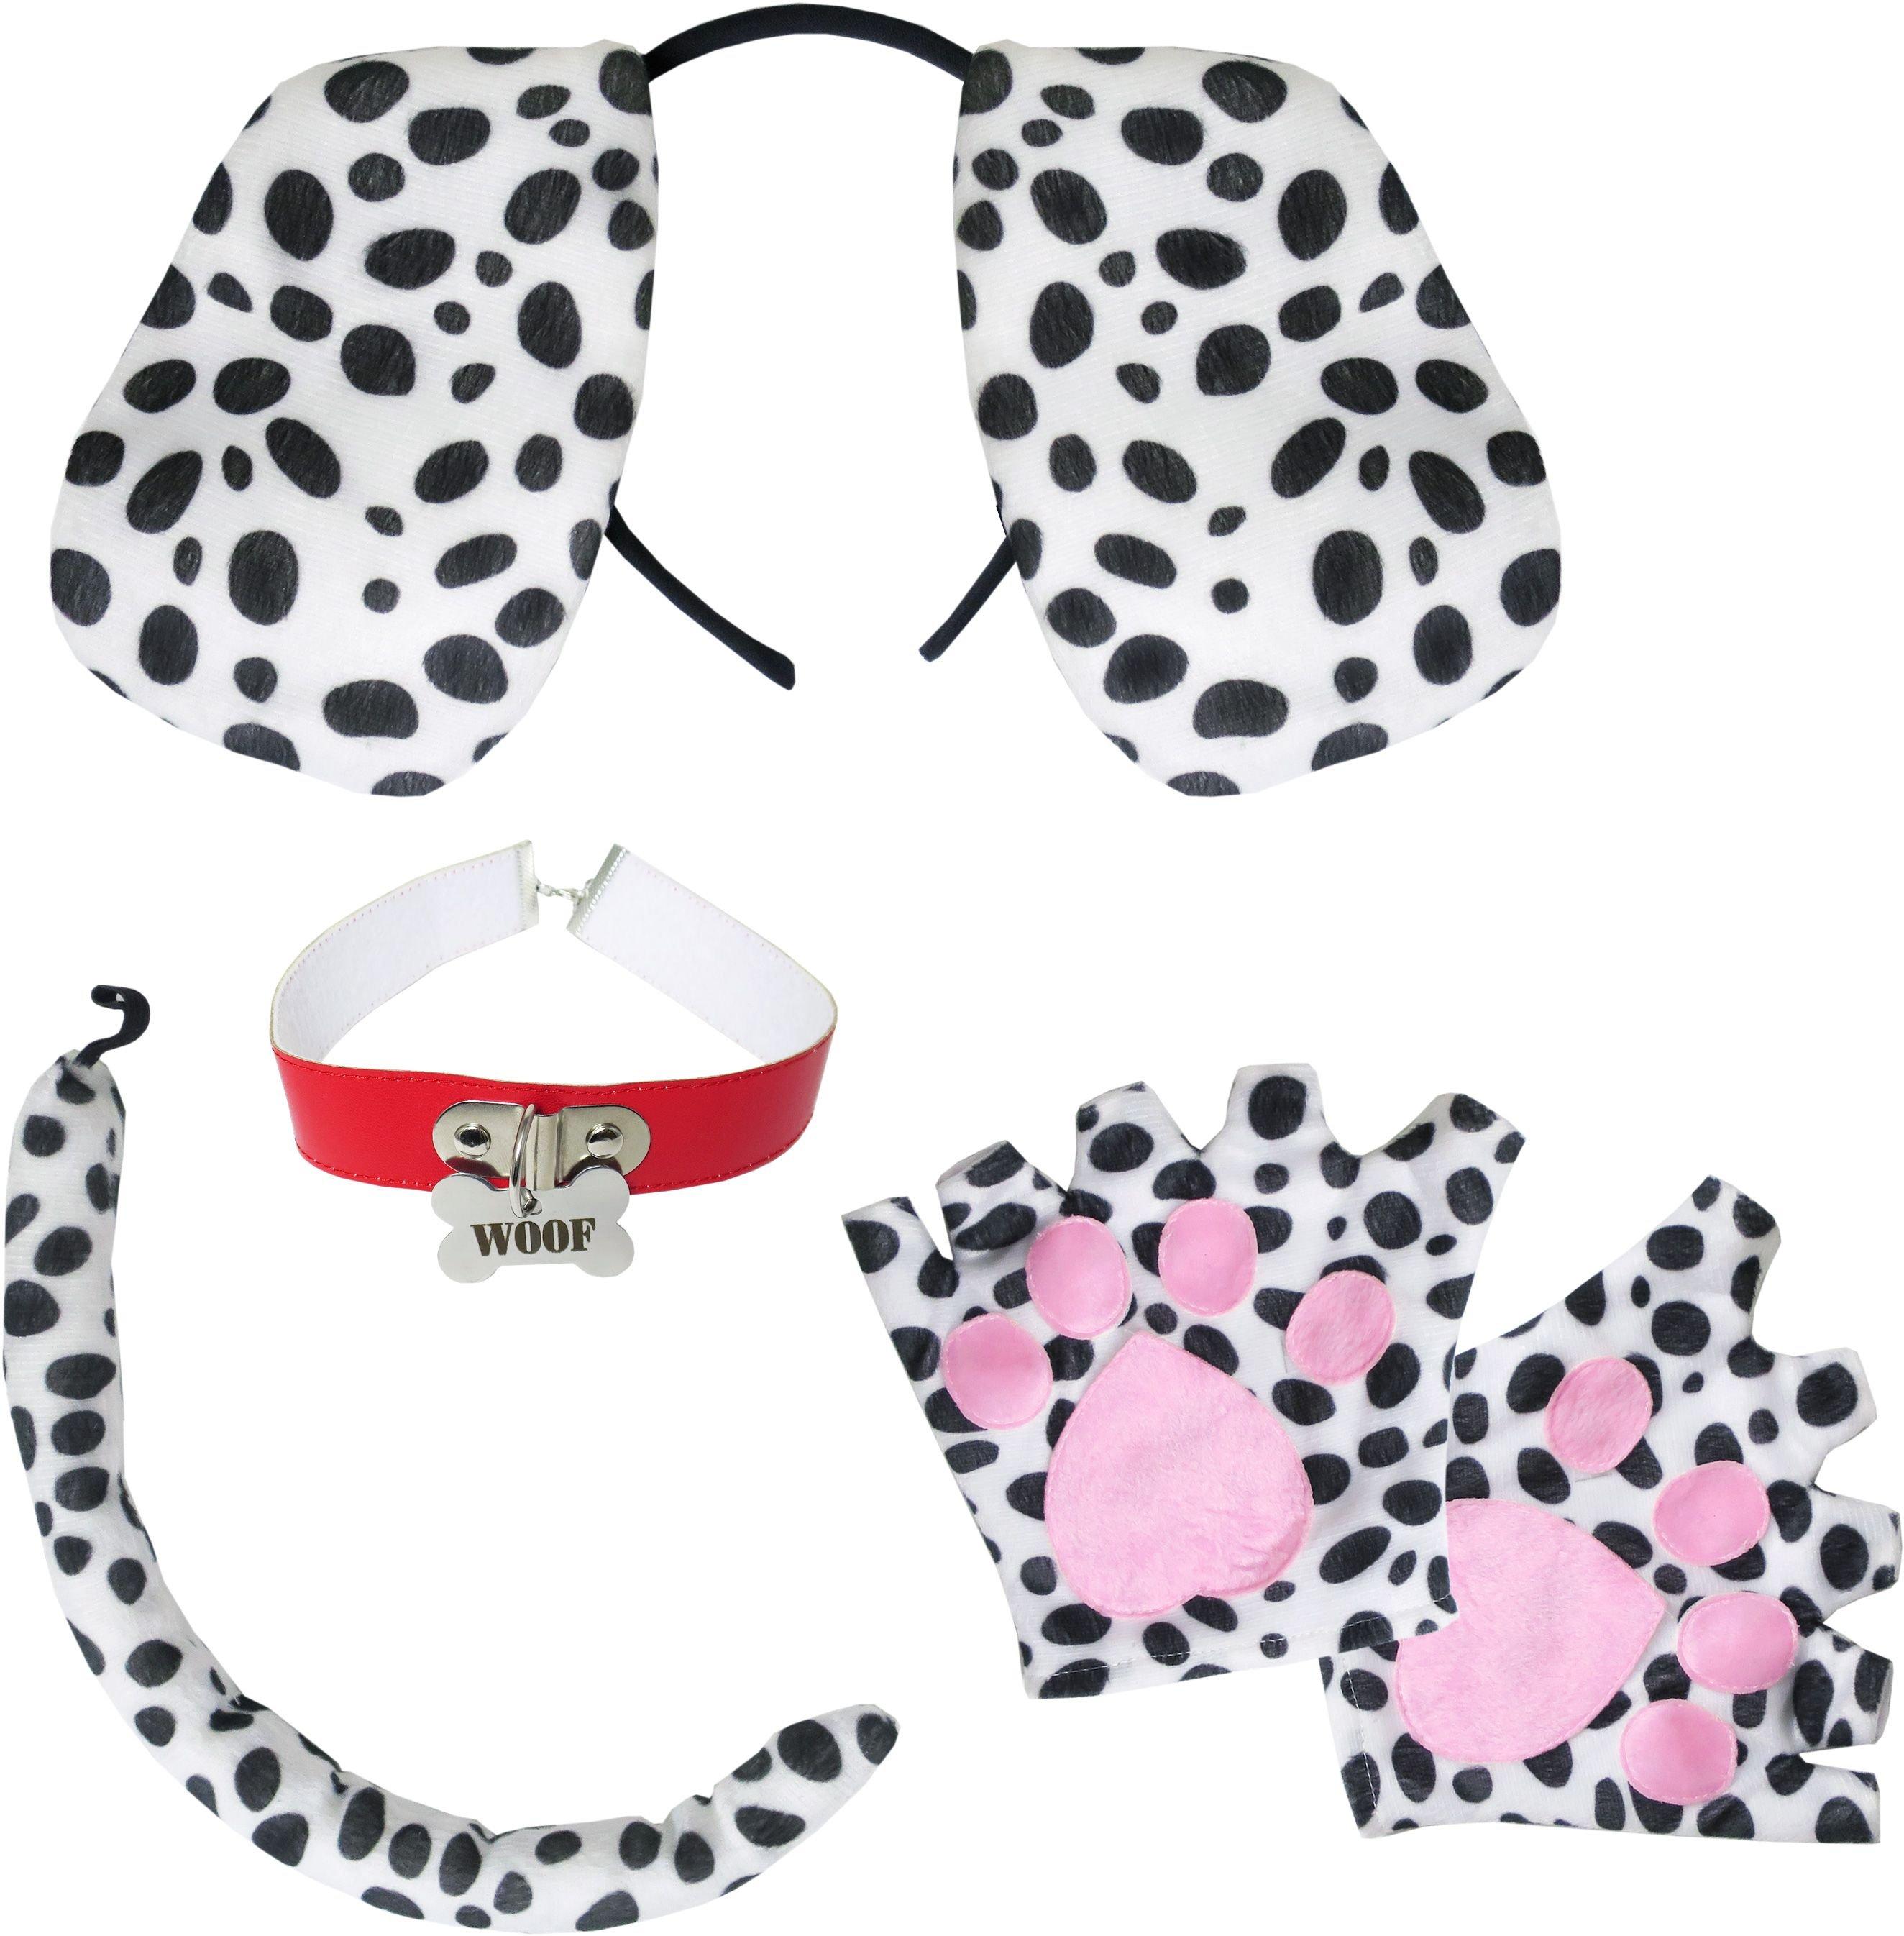 Halloween Dalmatian Costume Red Collar All Over Youth T Shirt